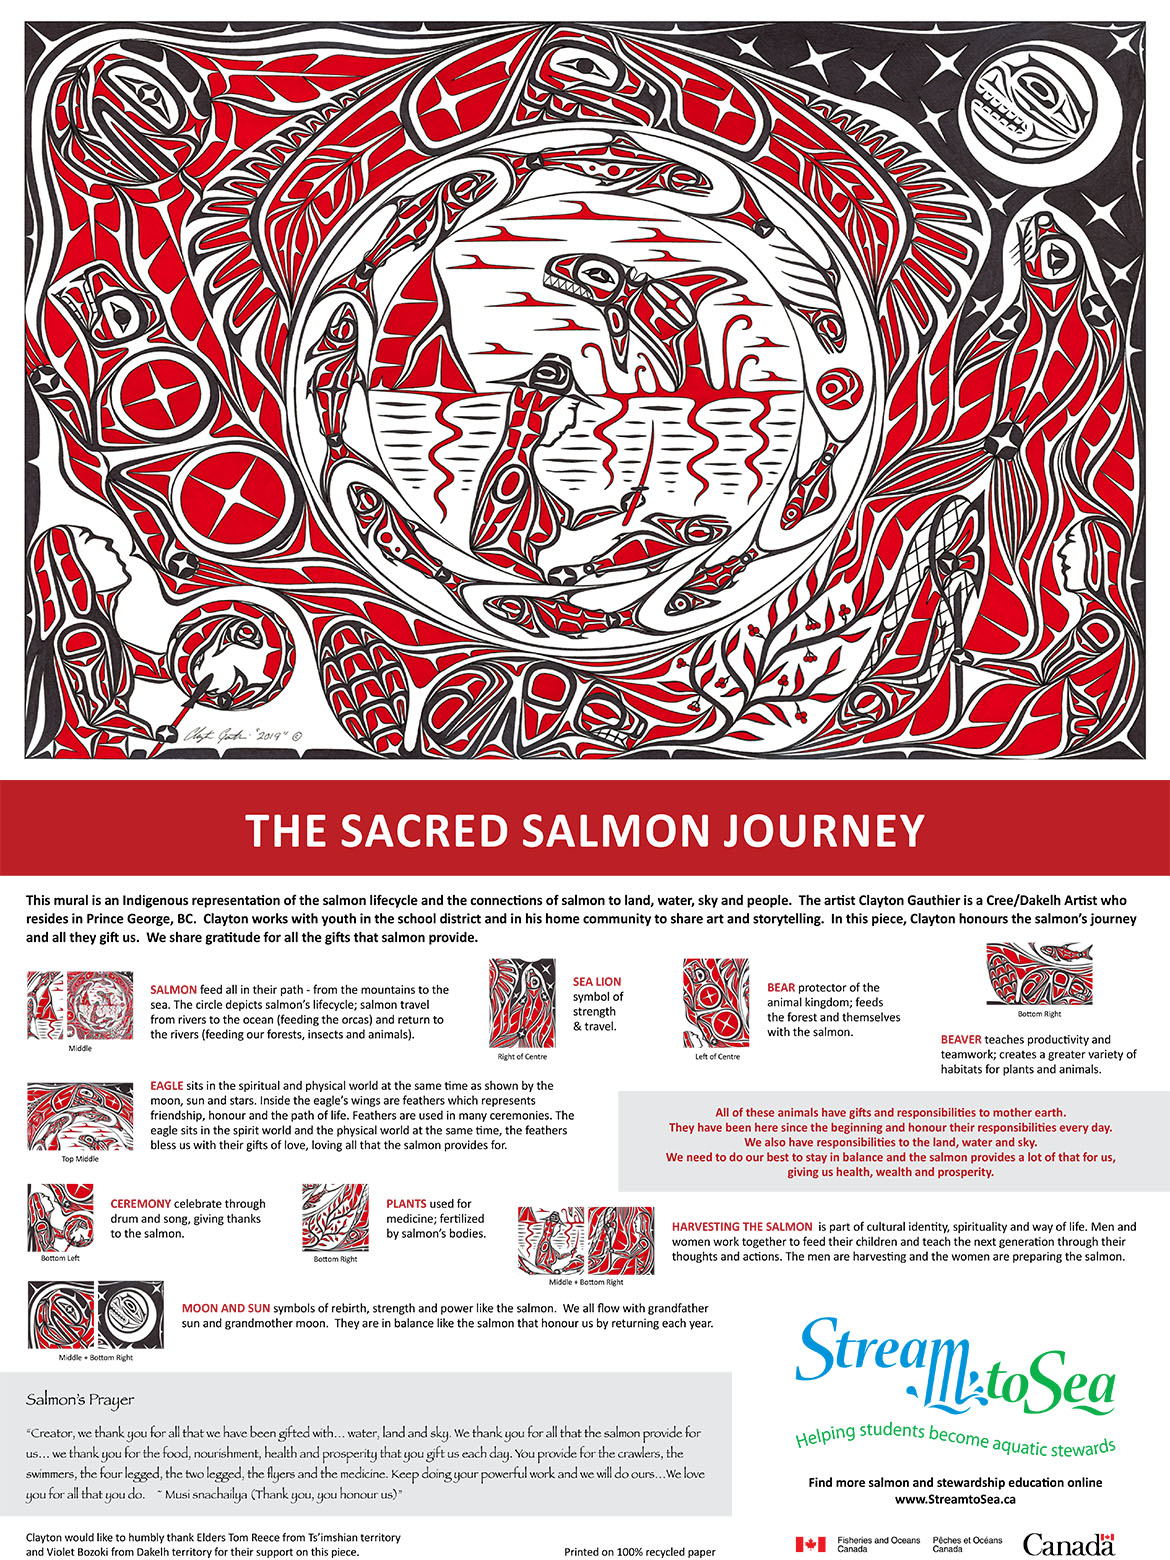 Infographic: The sacred salmon journey